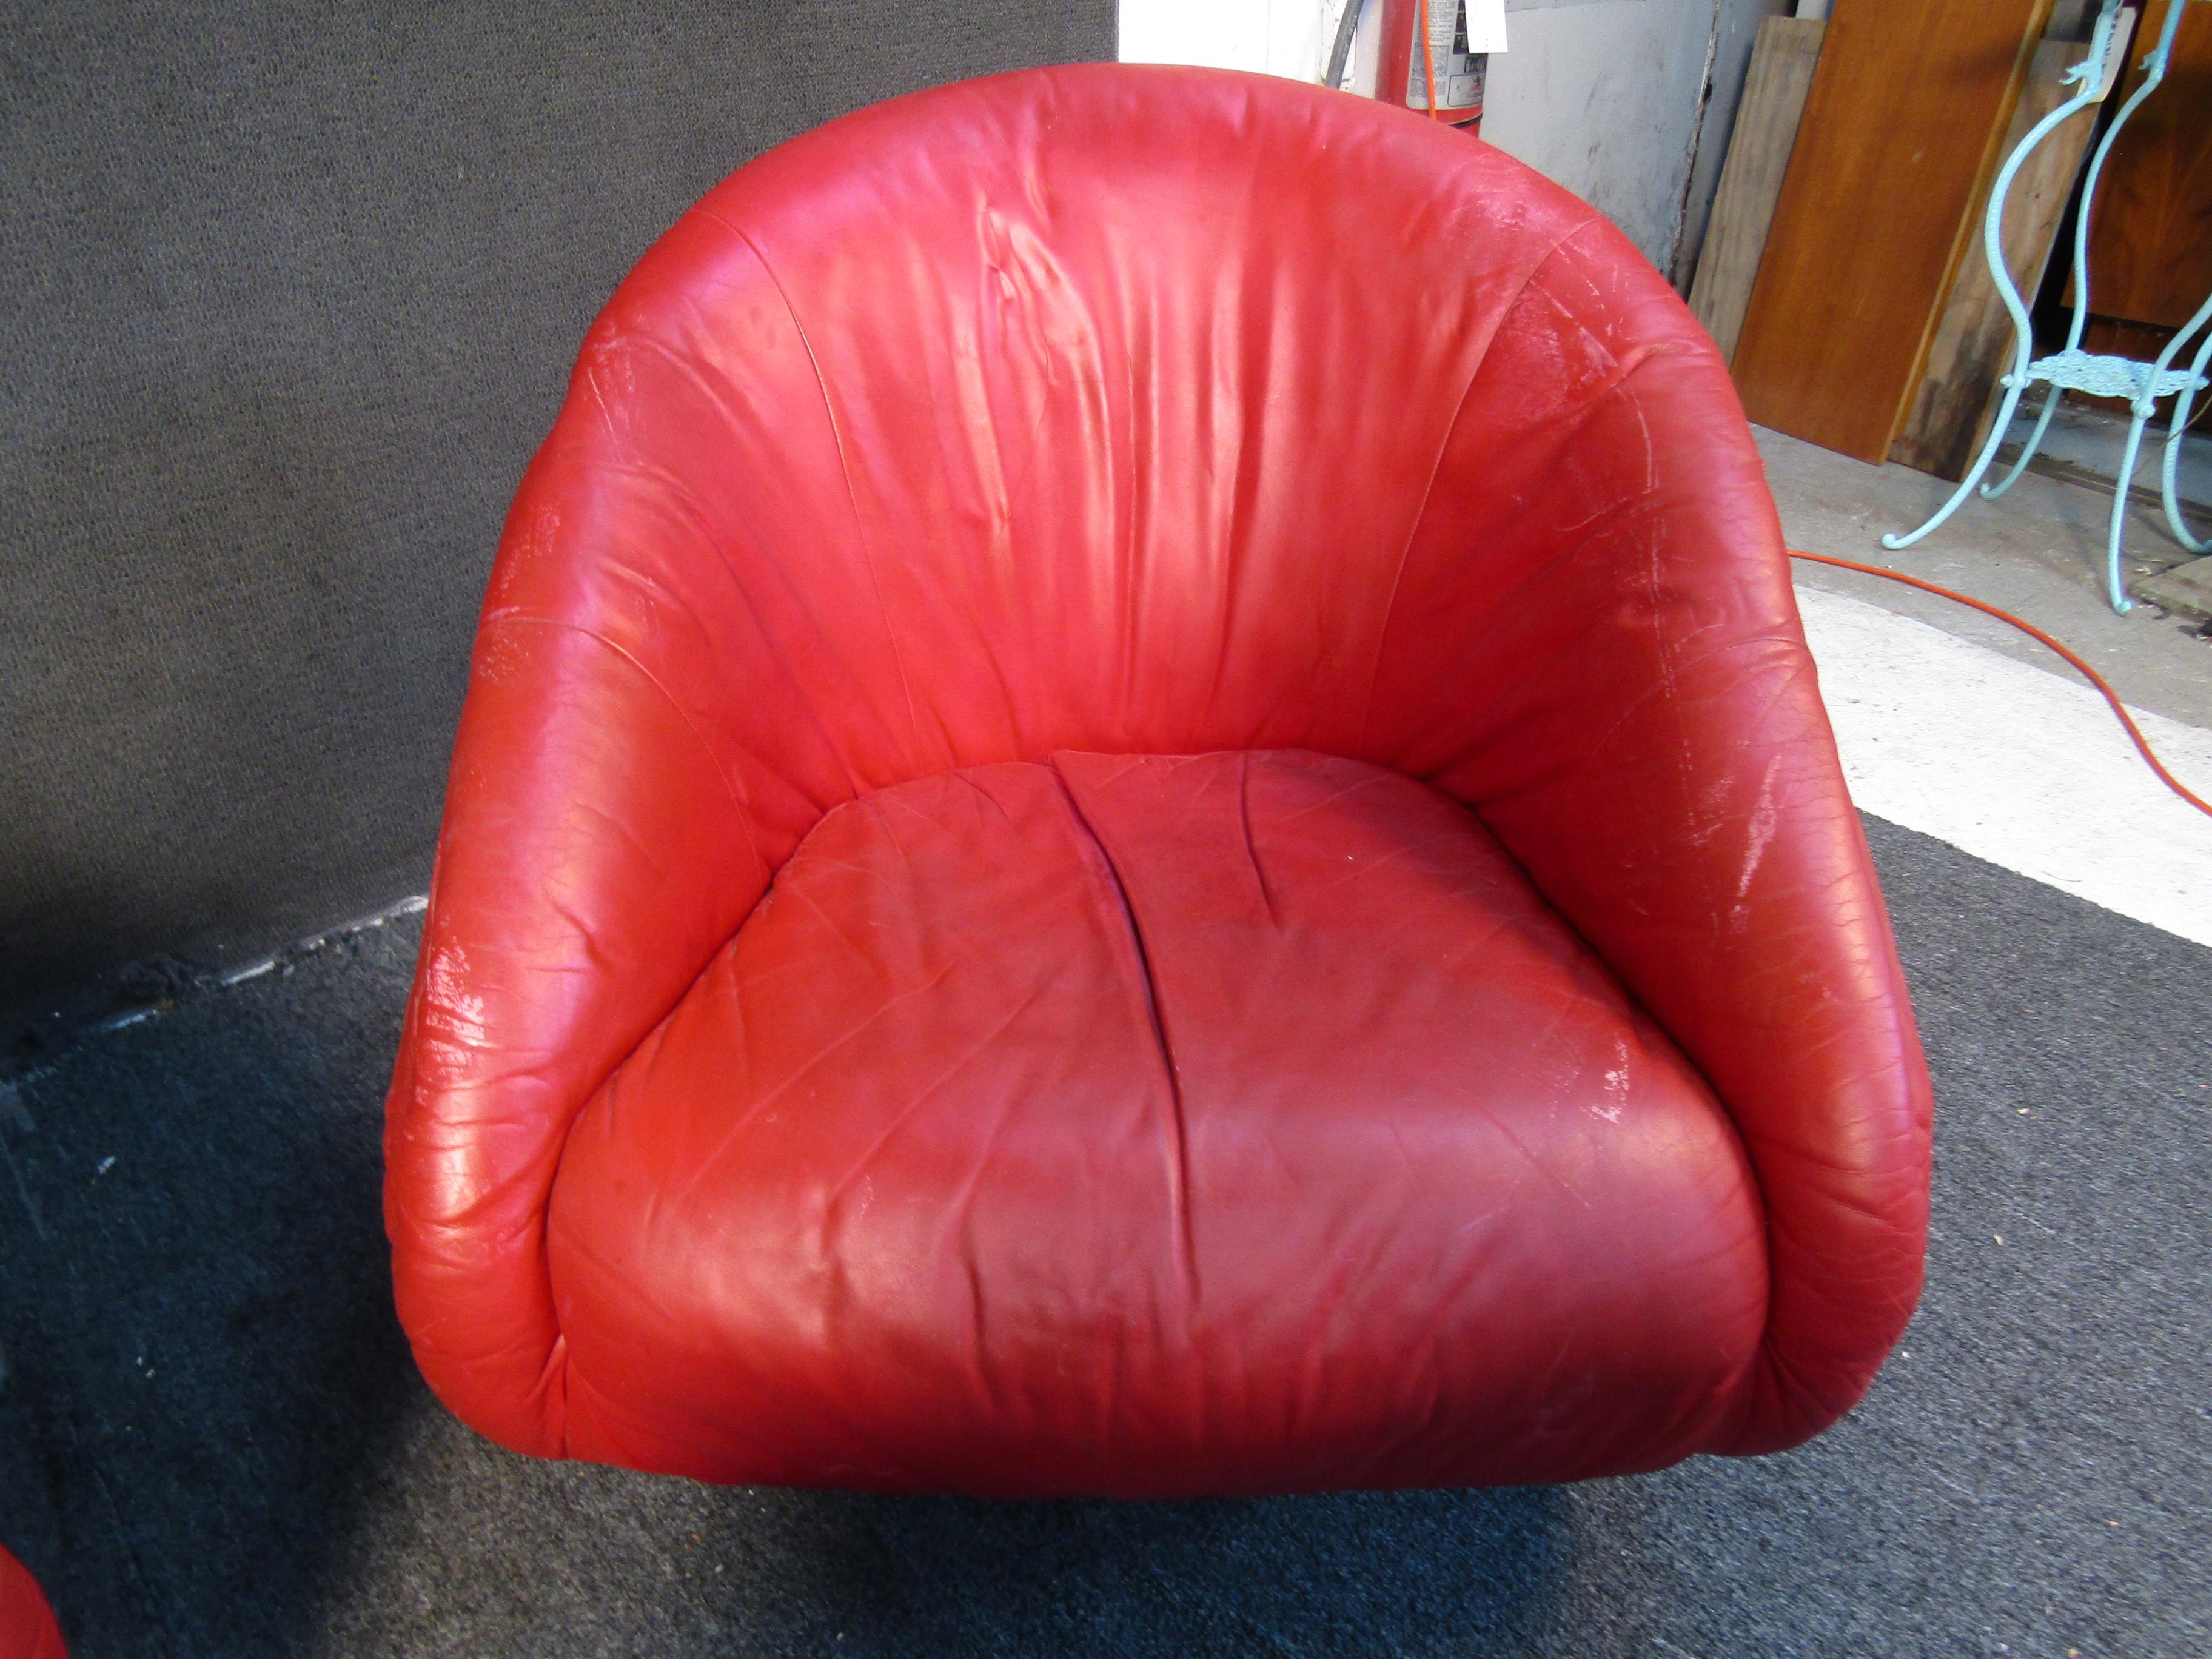 red oversized chair